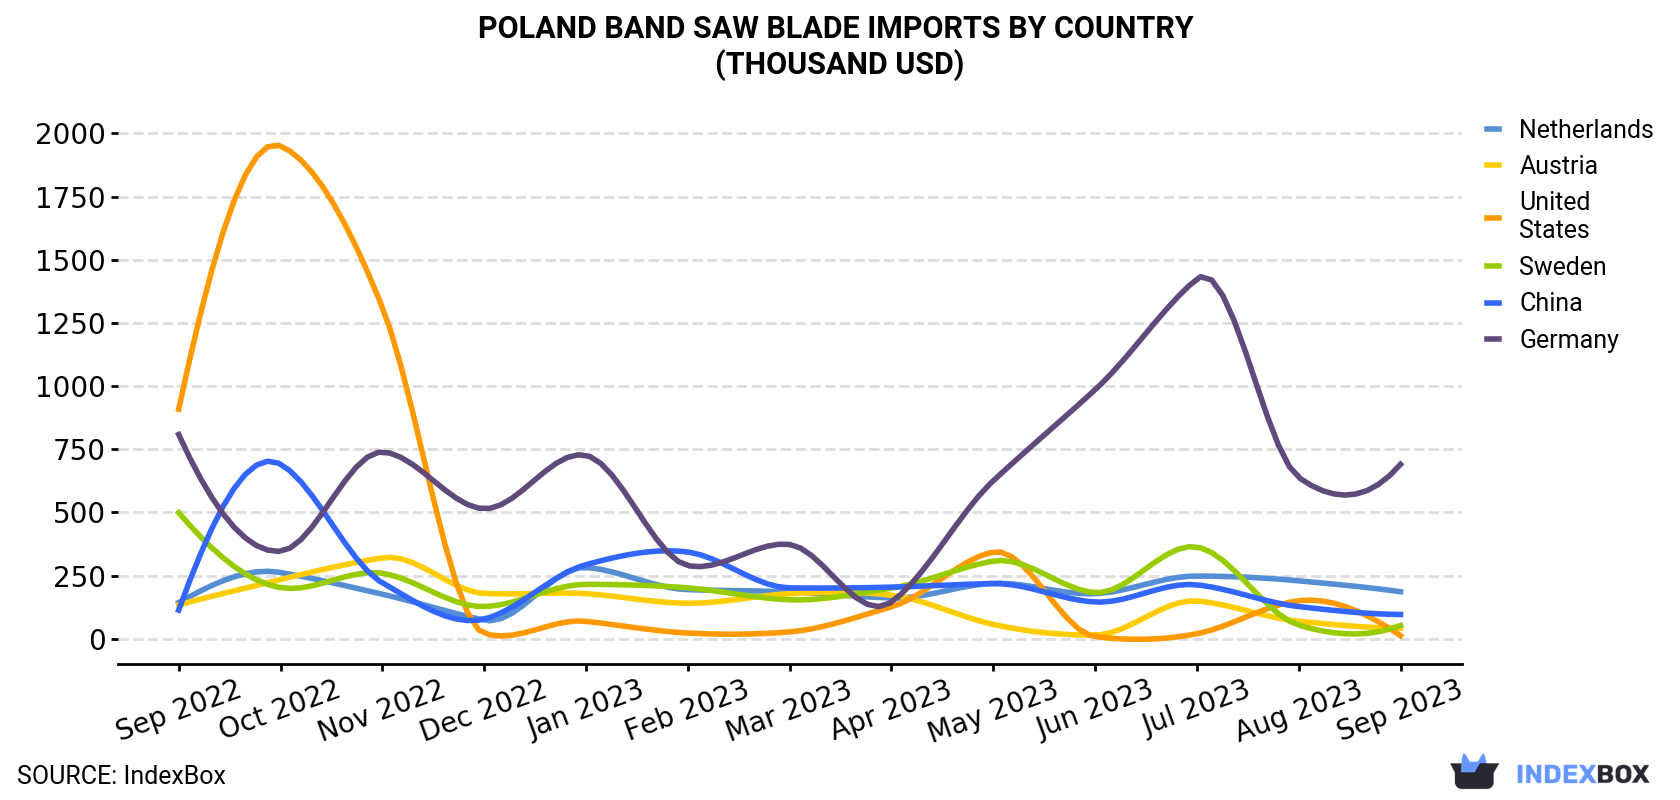 Poland Band Saw Blade Imports By Country (Thousand USD)